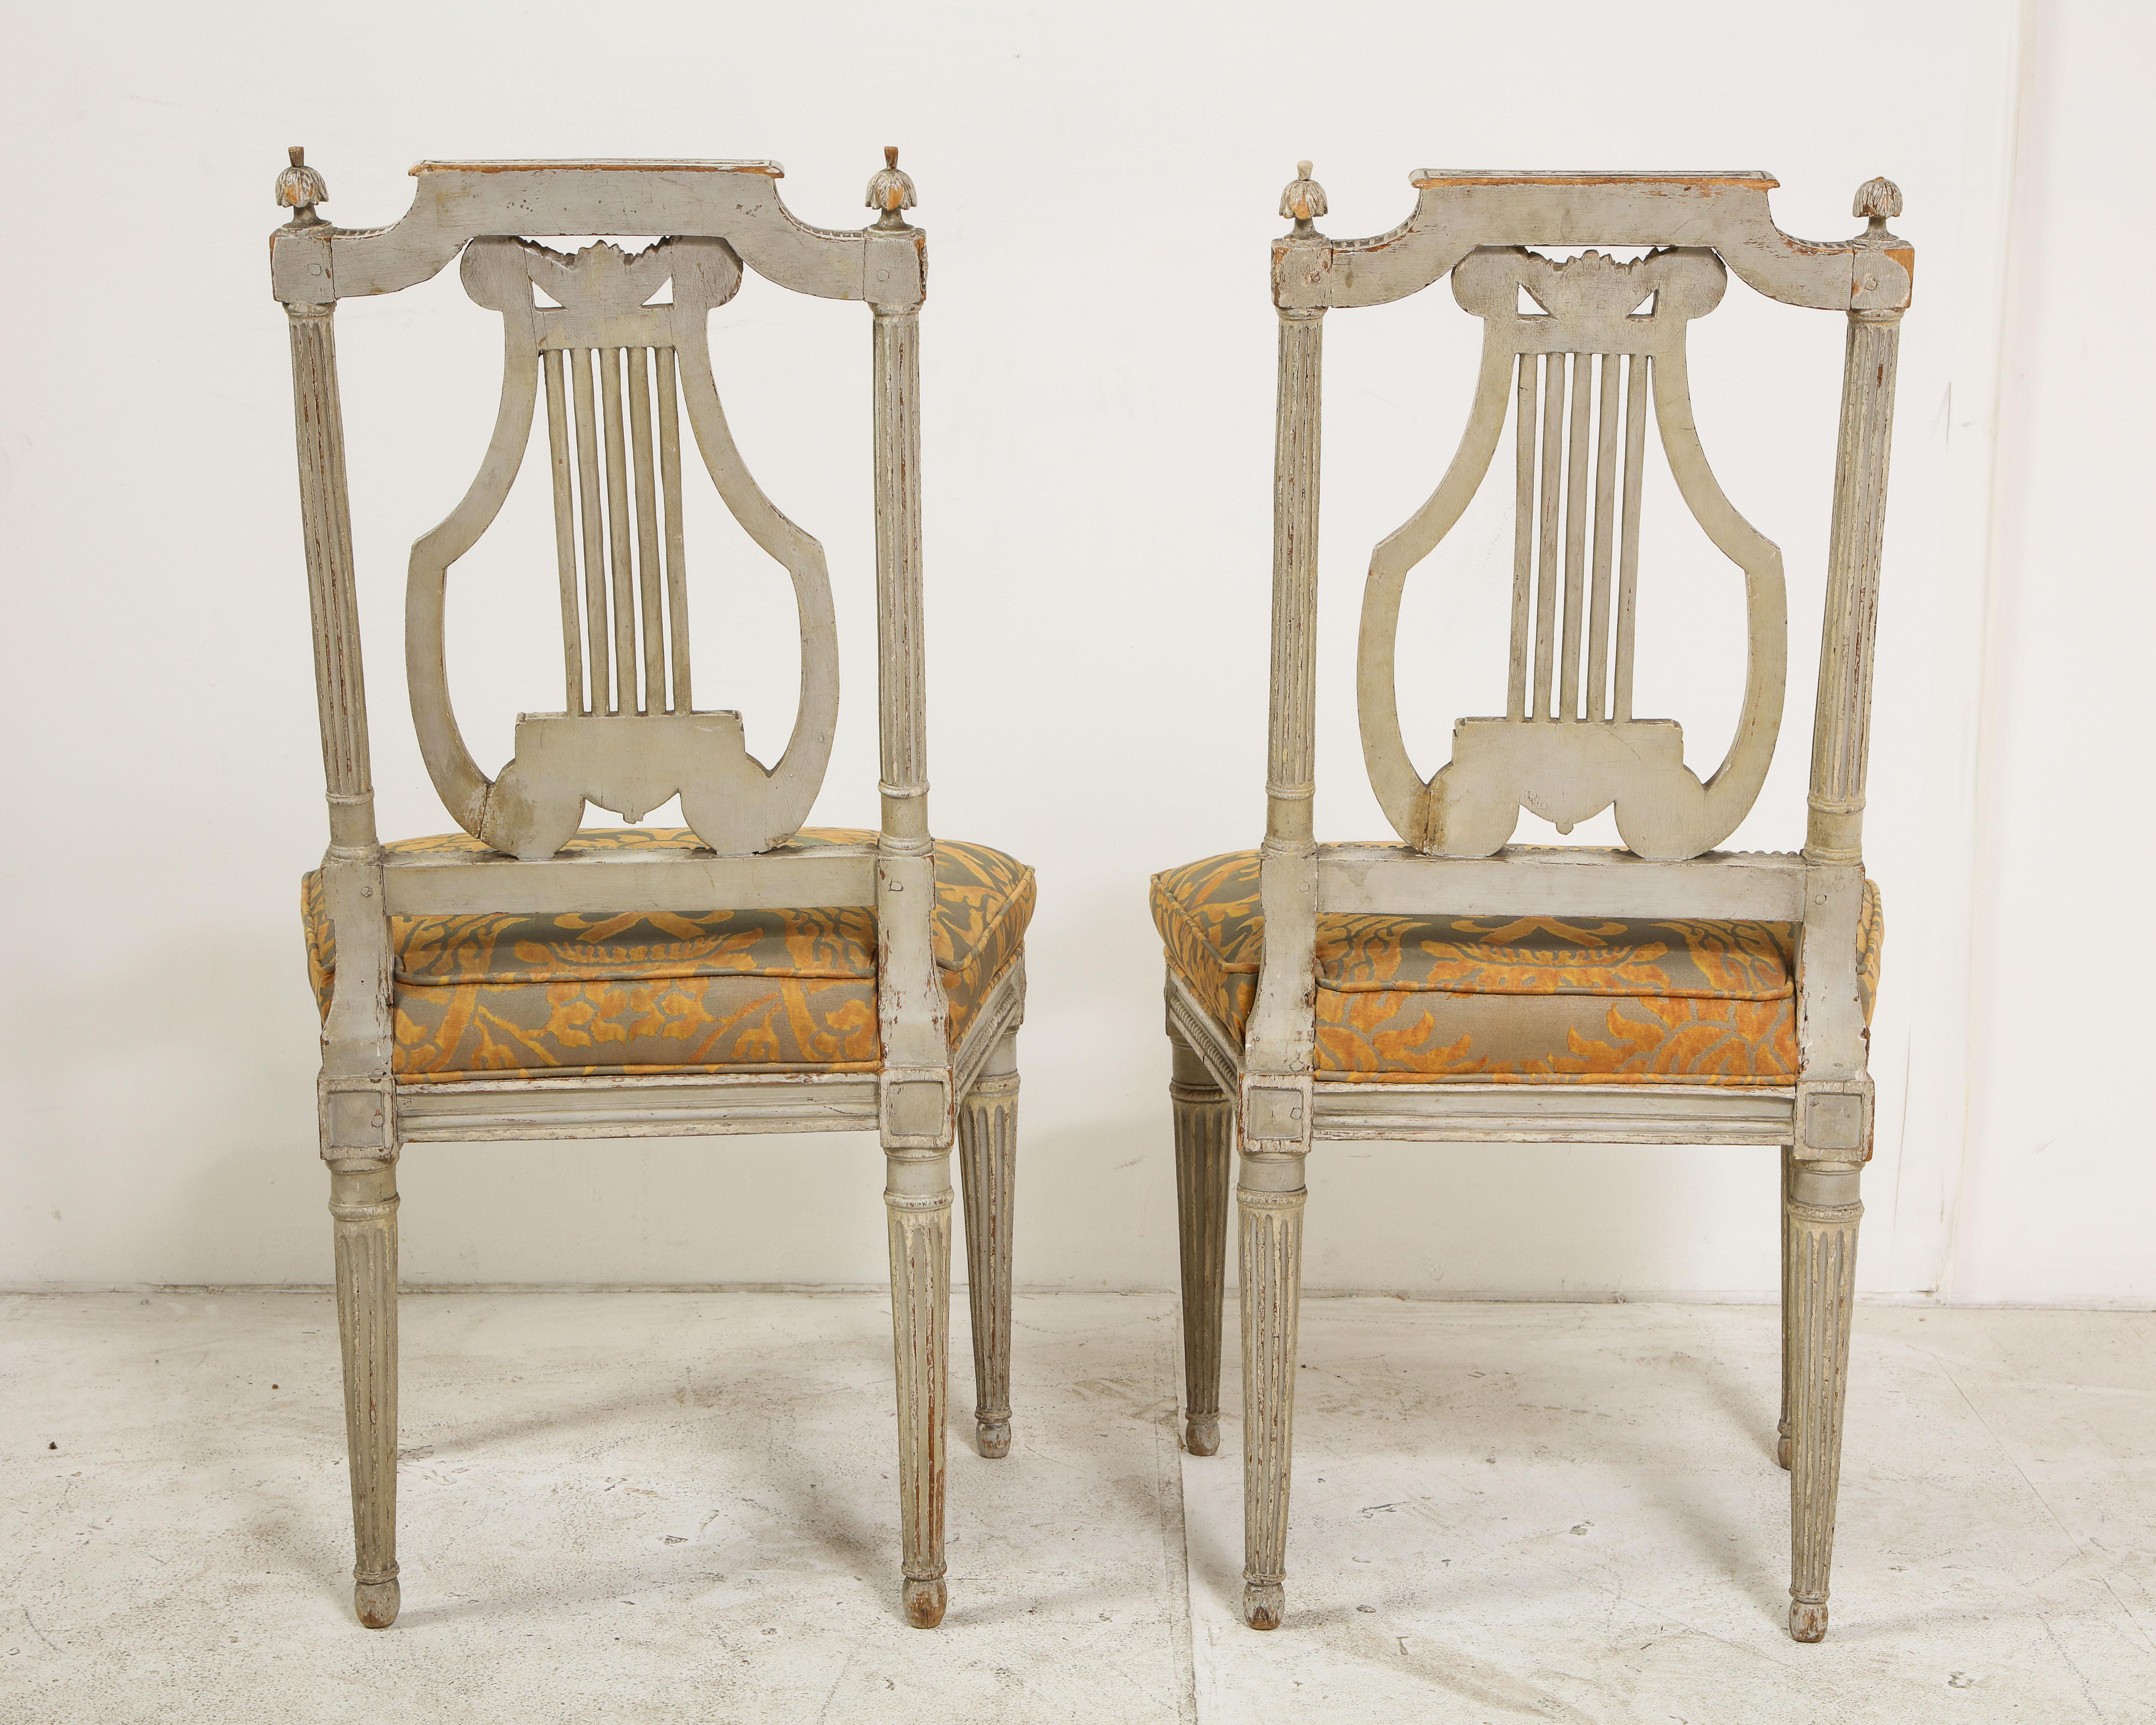 Pair of 19th Century Italian Painted Lyre-Back Chairs with Fortuny Seat Cushions 2